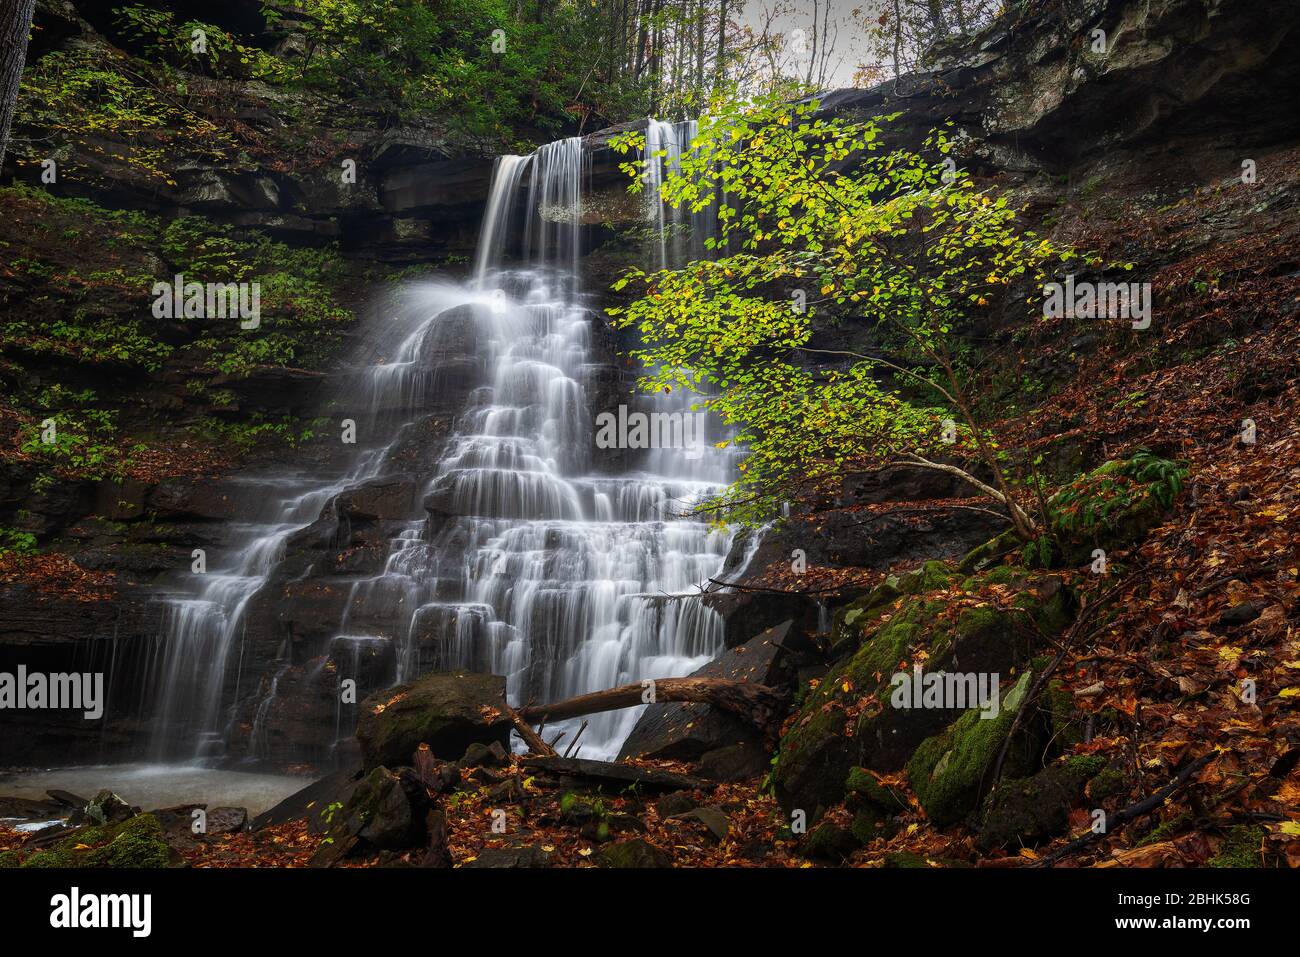 A serene waterfall within the Brush Creek Nature Preserve in West Virginia flows gently from a tall cascaded rock wall in front of a lush green tree. Stock Photo